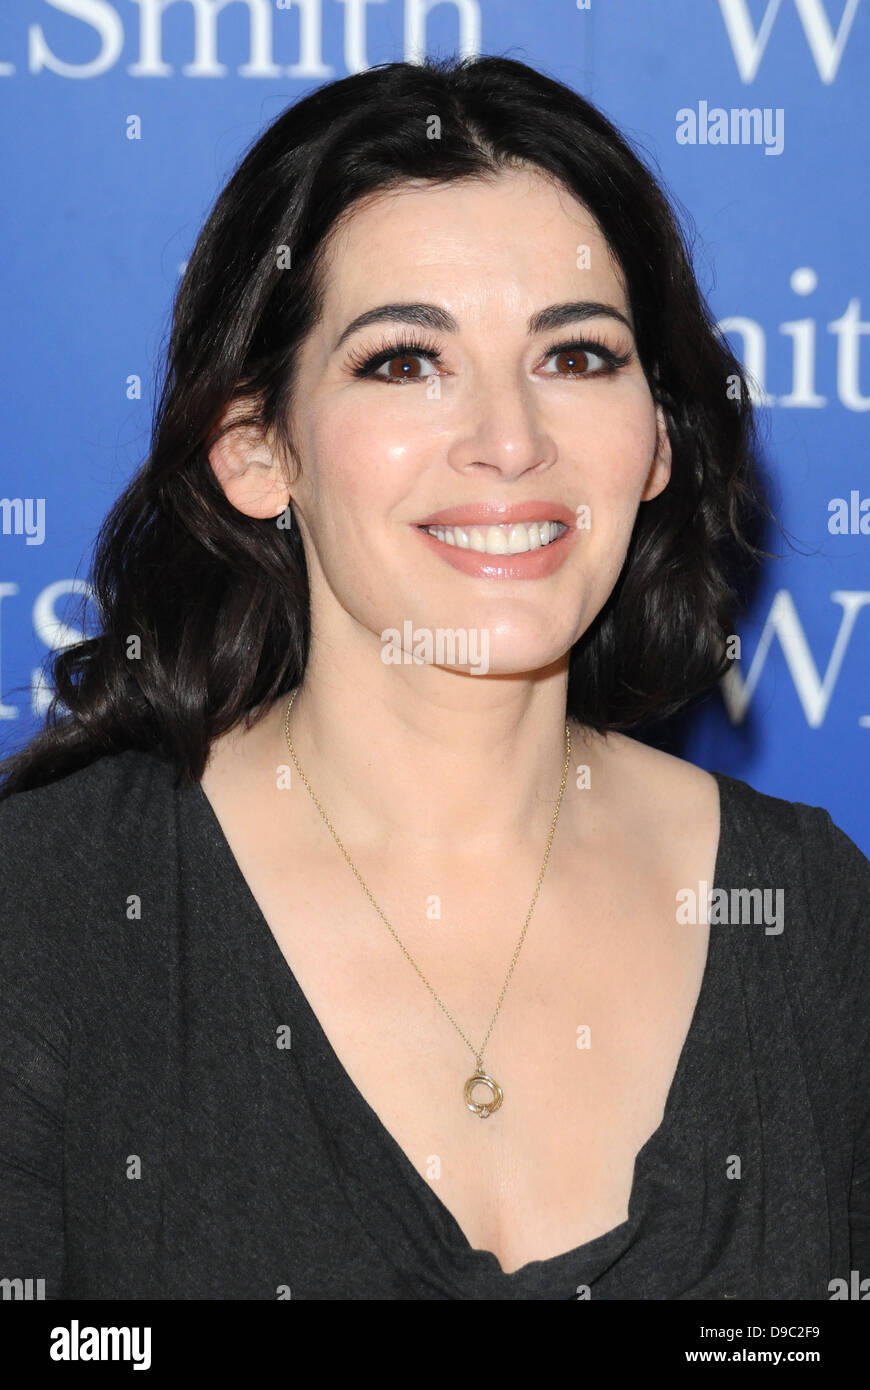 (File Pics) Nigella Lawson Photographed At A Book Signing In October 2012 Where She Signed Copies Of Her Book 'Nigellissima' At WH Smith, Lakeside Shopping Centre, Thurrock, Essex, UK, 25th October 2012  Credit: Ben Rector/Alamy Stock Photo